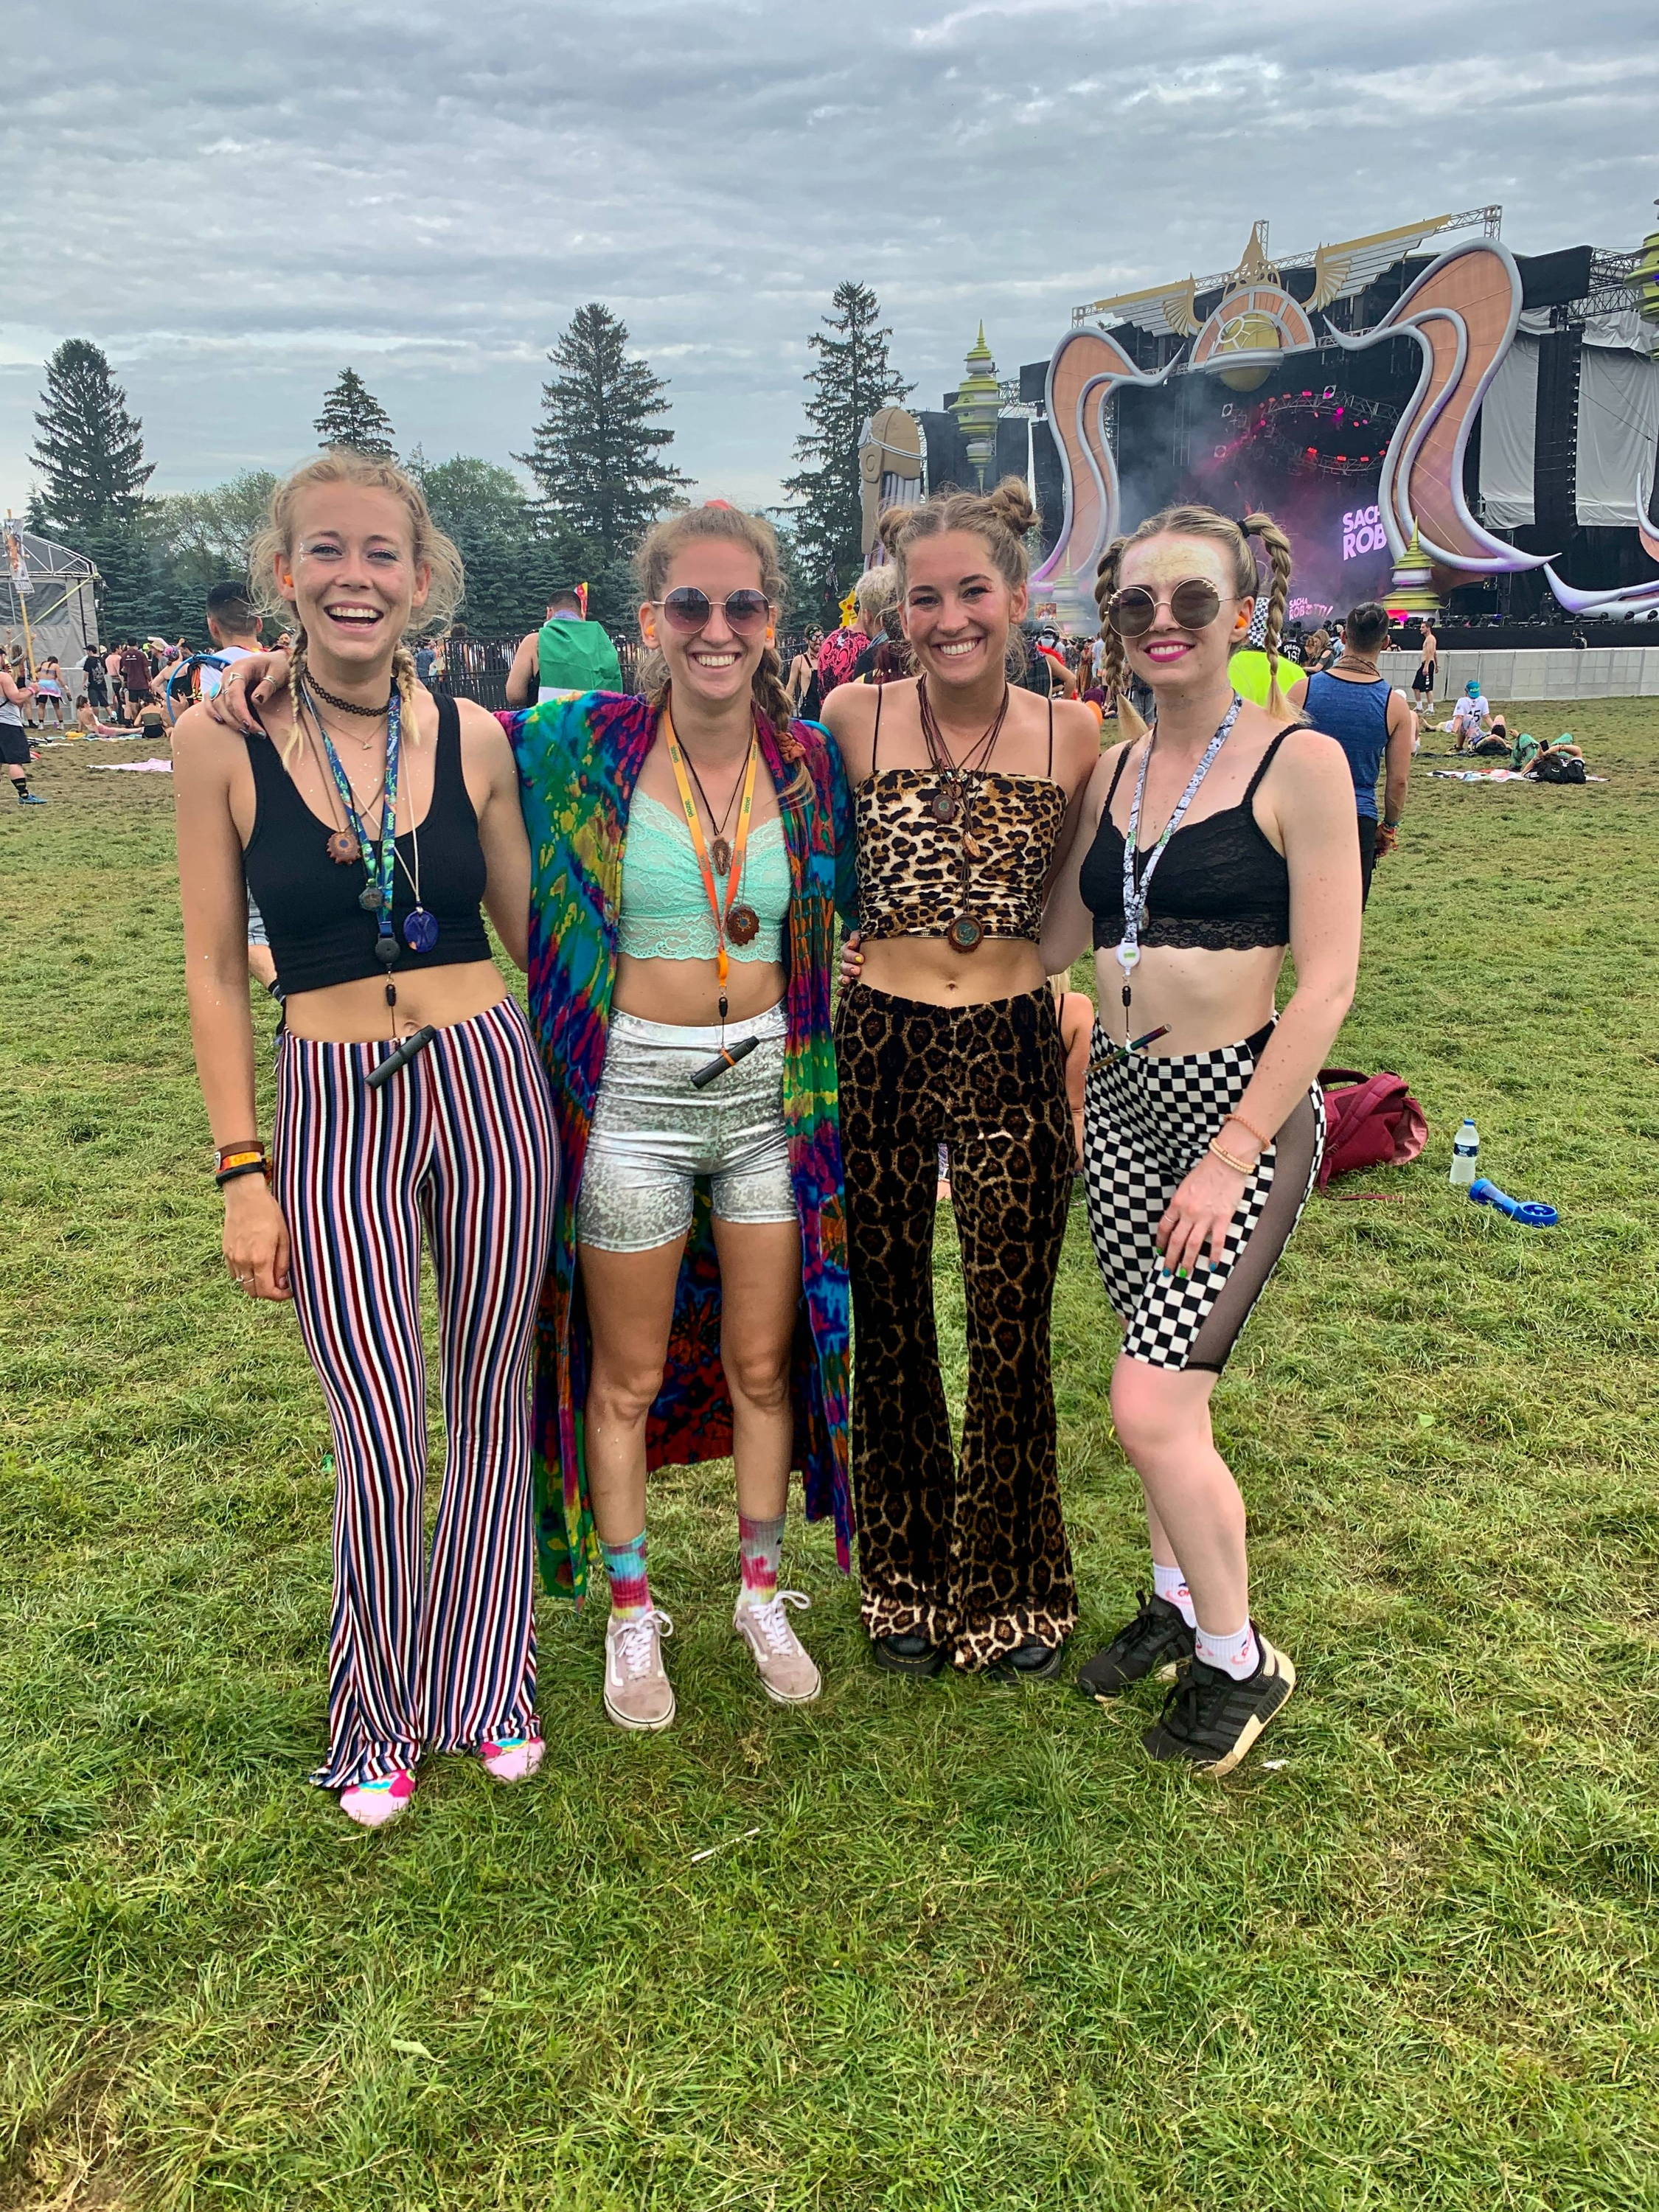 Four white girls are posing together with a stage at a music festival in the background. 3 of the girls have Ooze lanyards with vape pens around their necks.